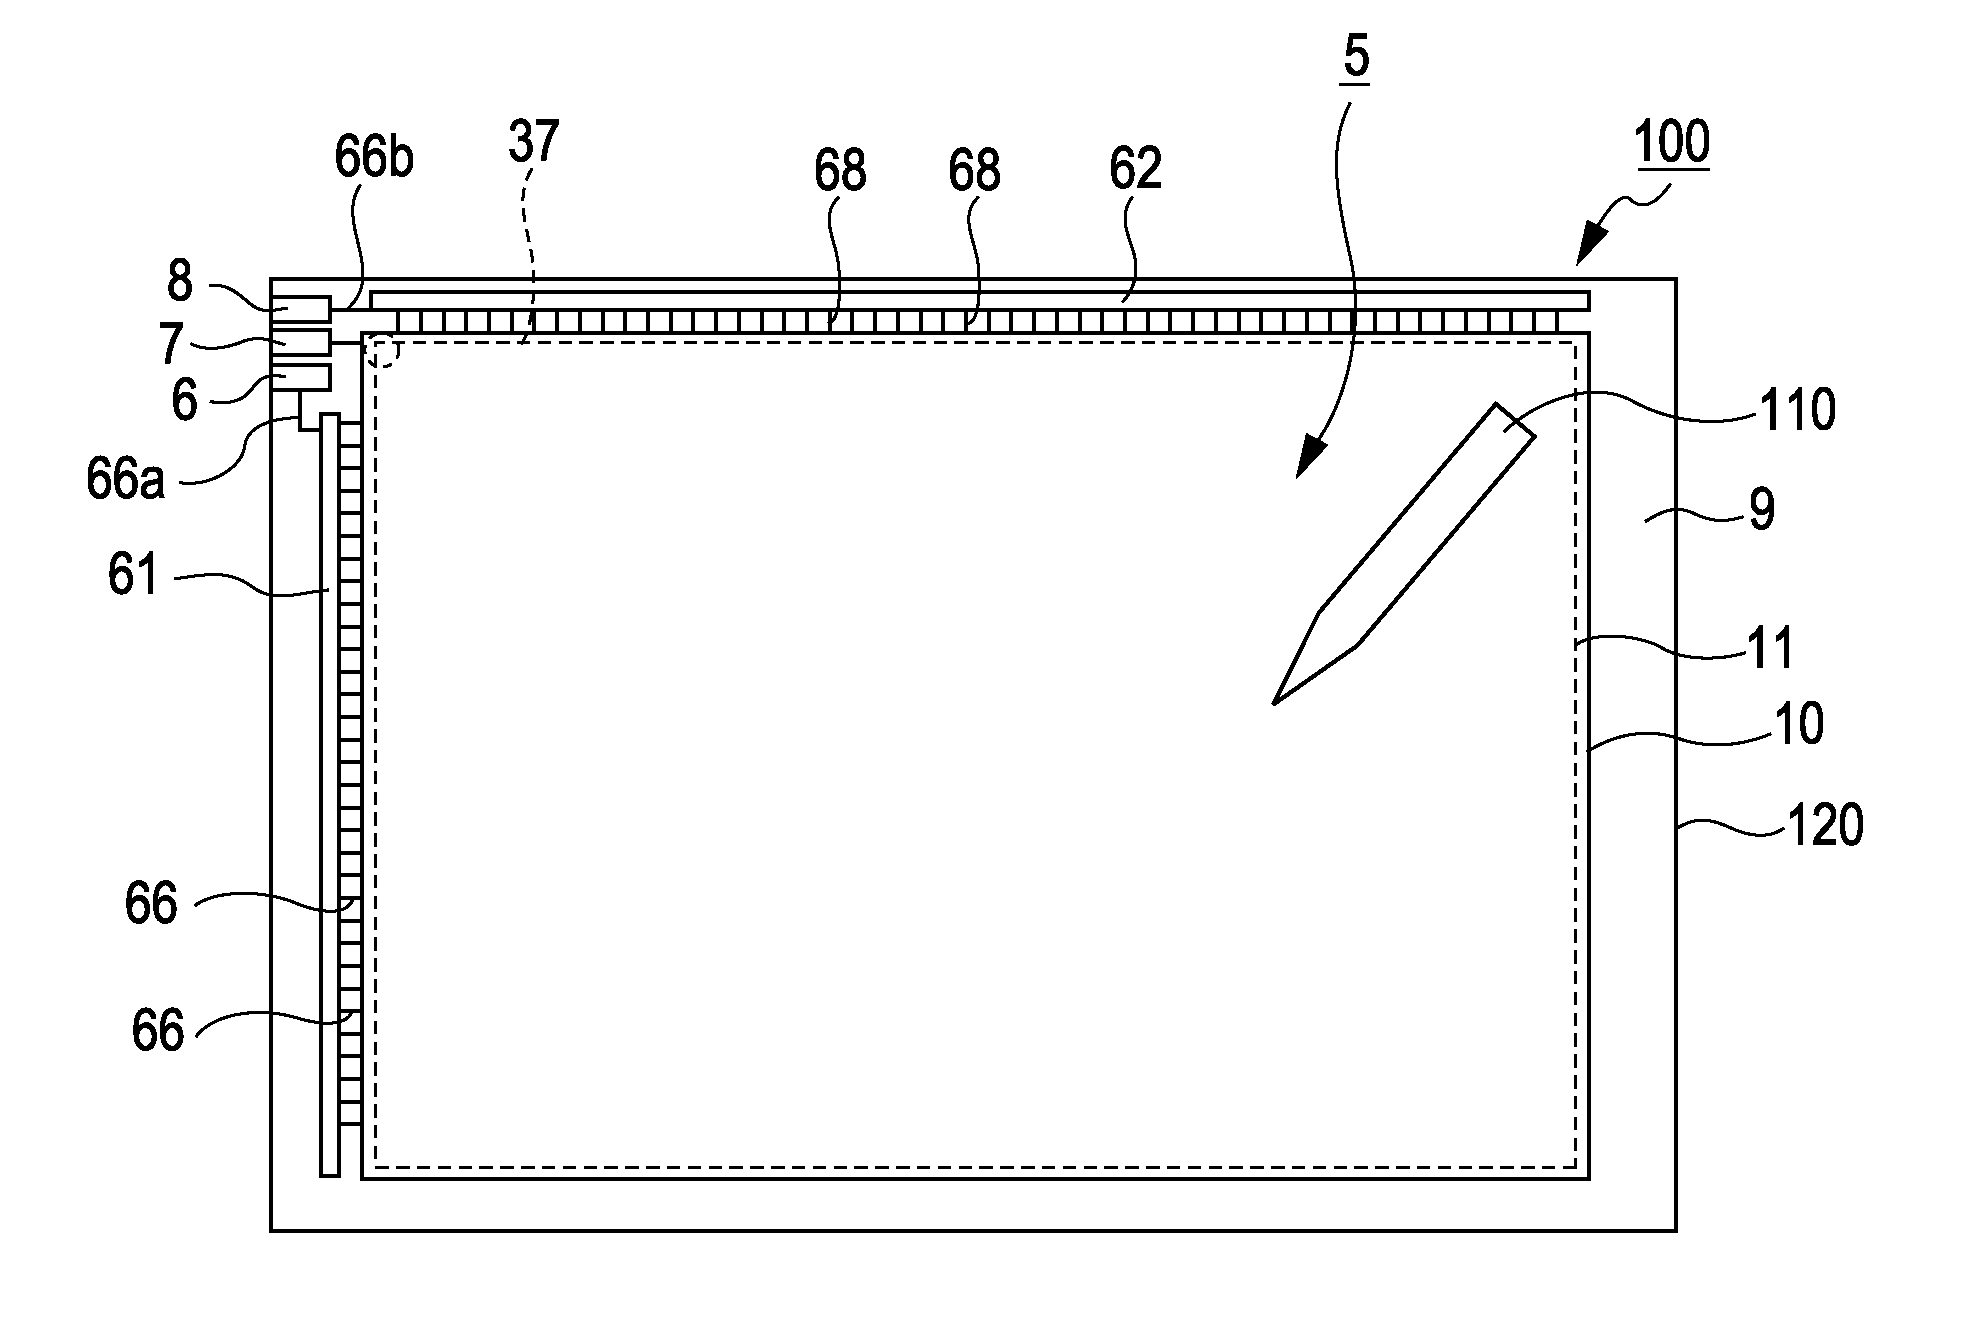 Input function display device